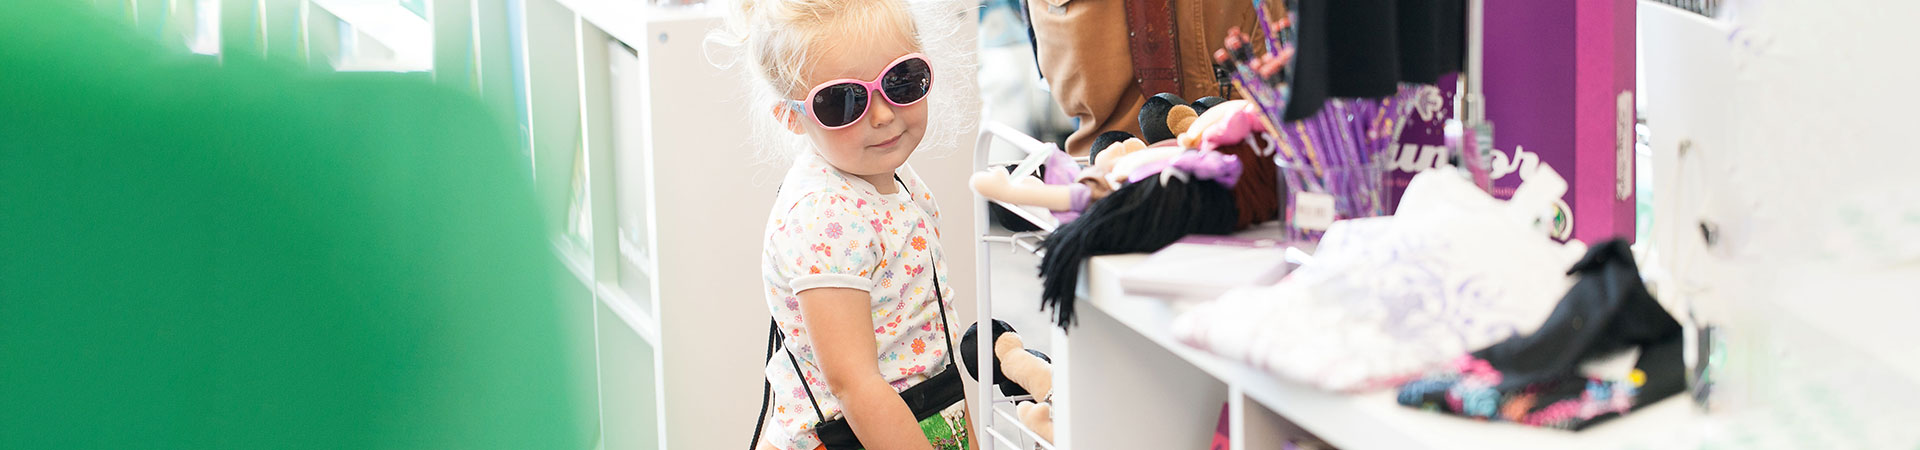  young girl scout trying on pink and blue sunglasses in the shop 